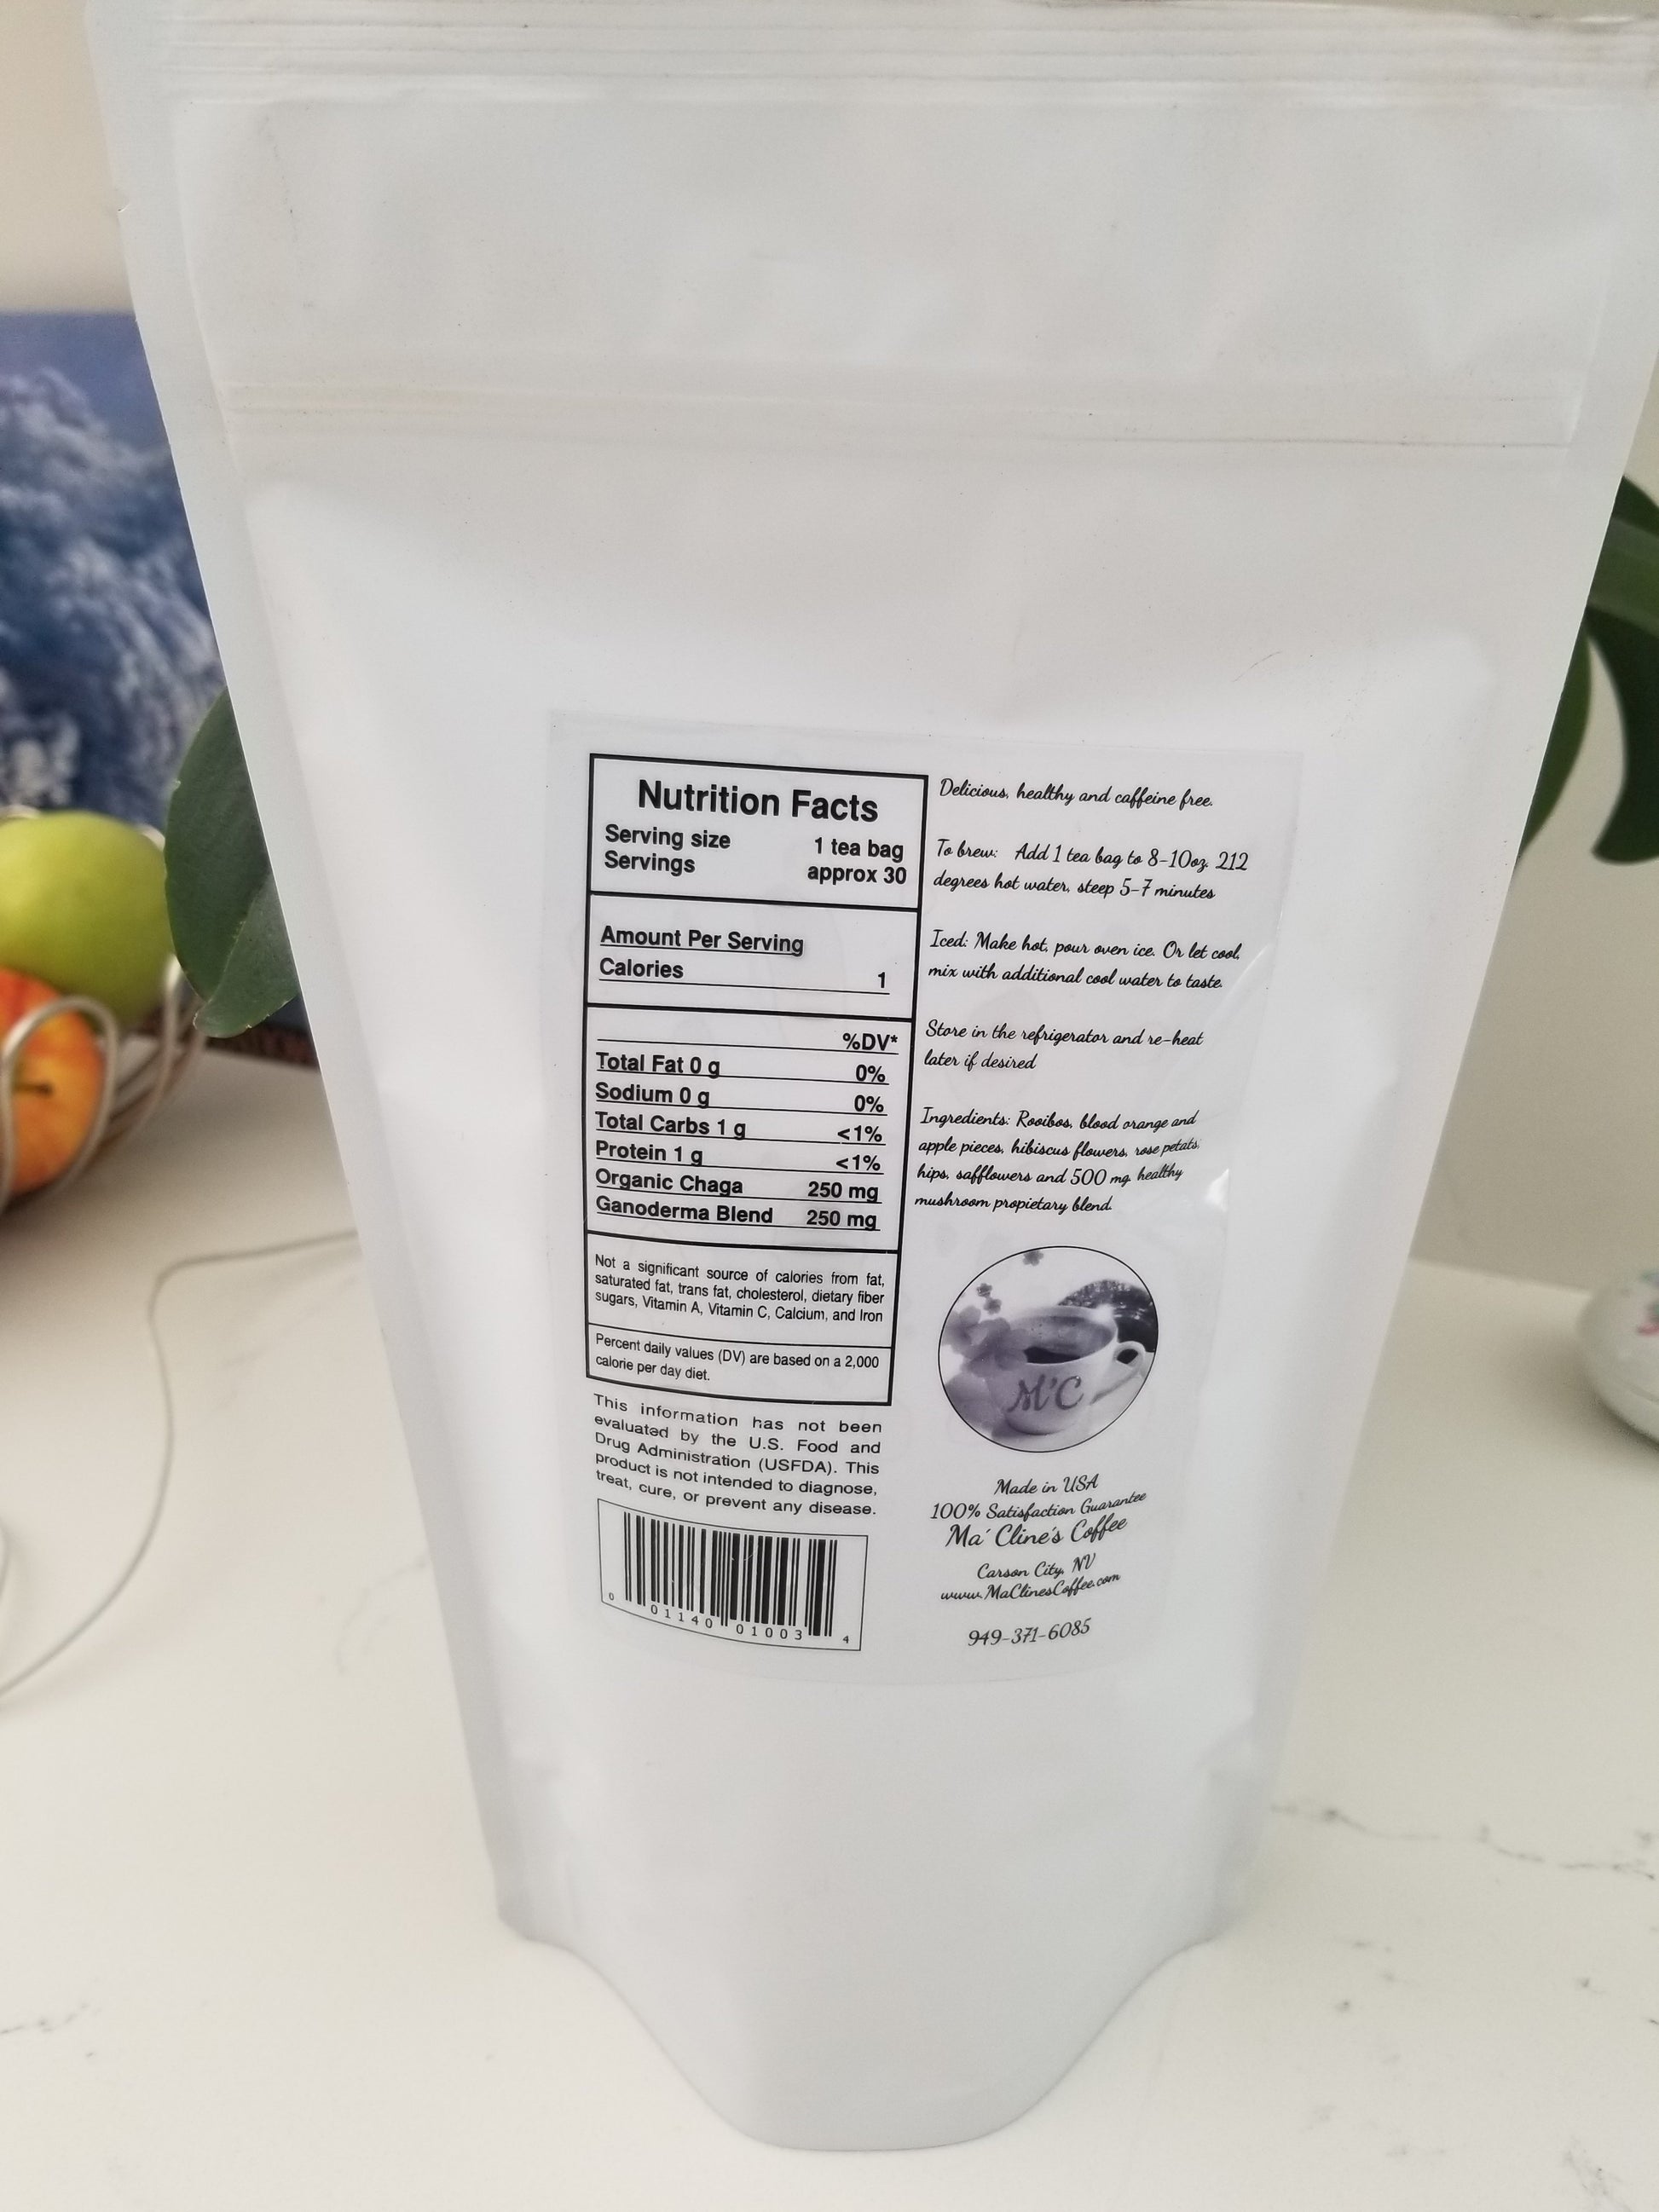 White bag with rear label of Ma' Cline's delicious GanoCelebrate Chaga Rooibos Tea. Nutrition Facts and preparation instructions